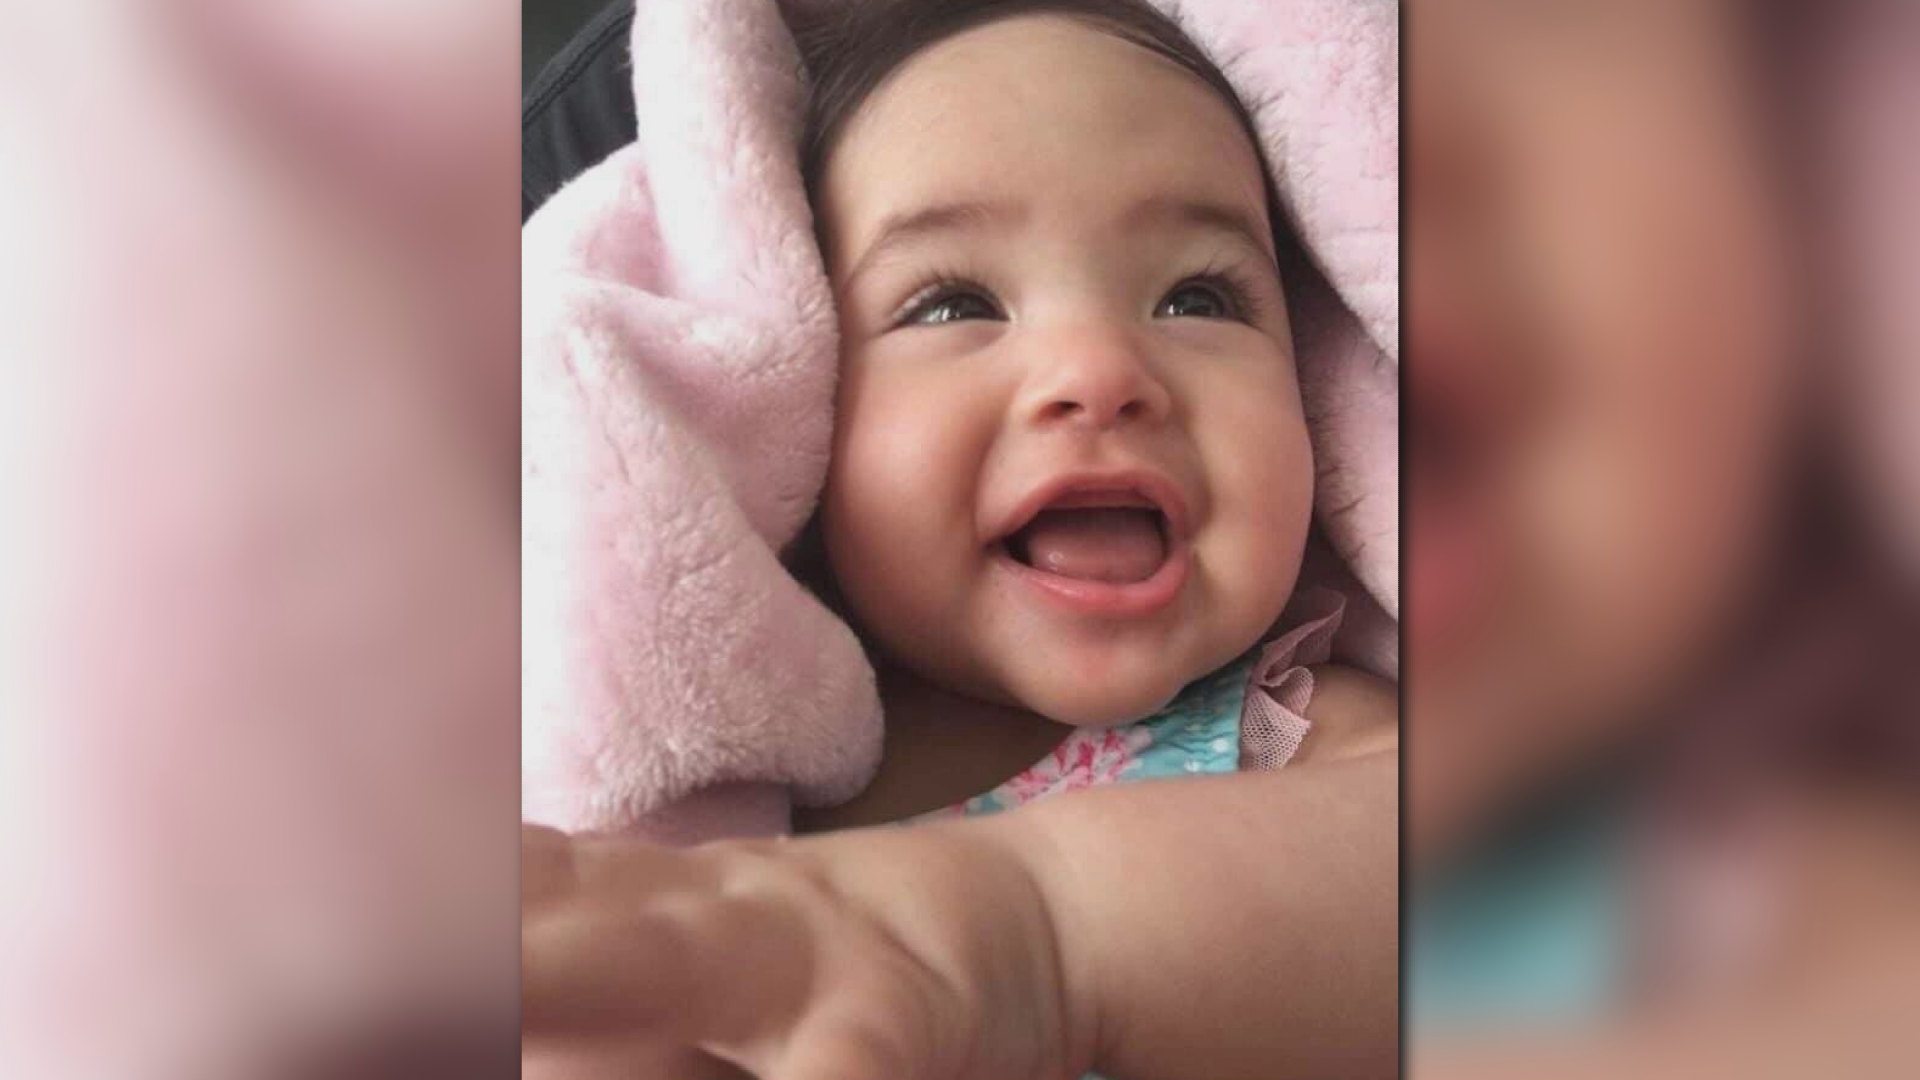 Azaelia Raine RedHorse Jones’ family is hosting a fundraising car wash on Wednesday and Thursday to raise funds for her memorial service.